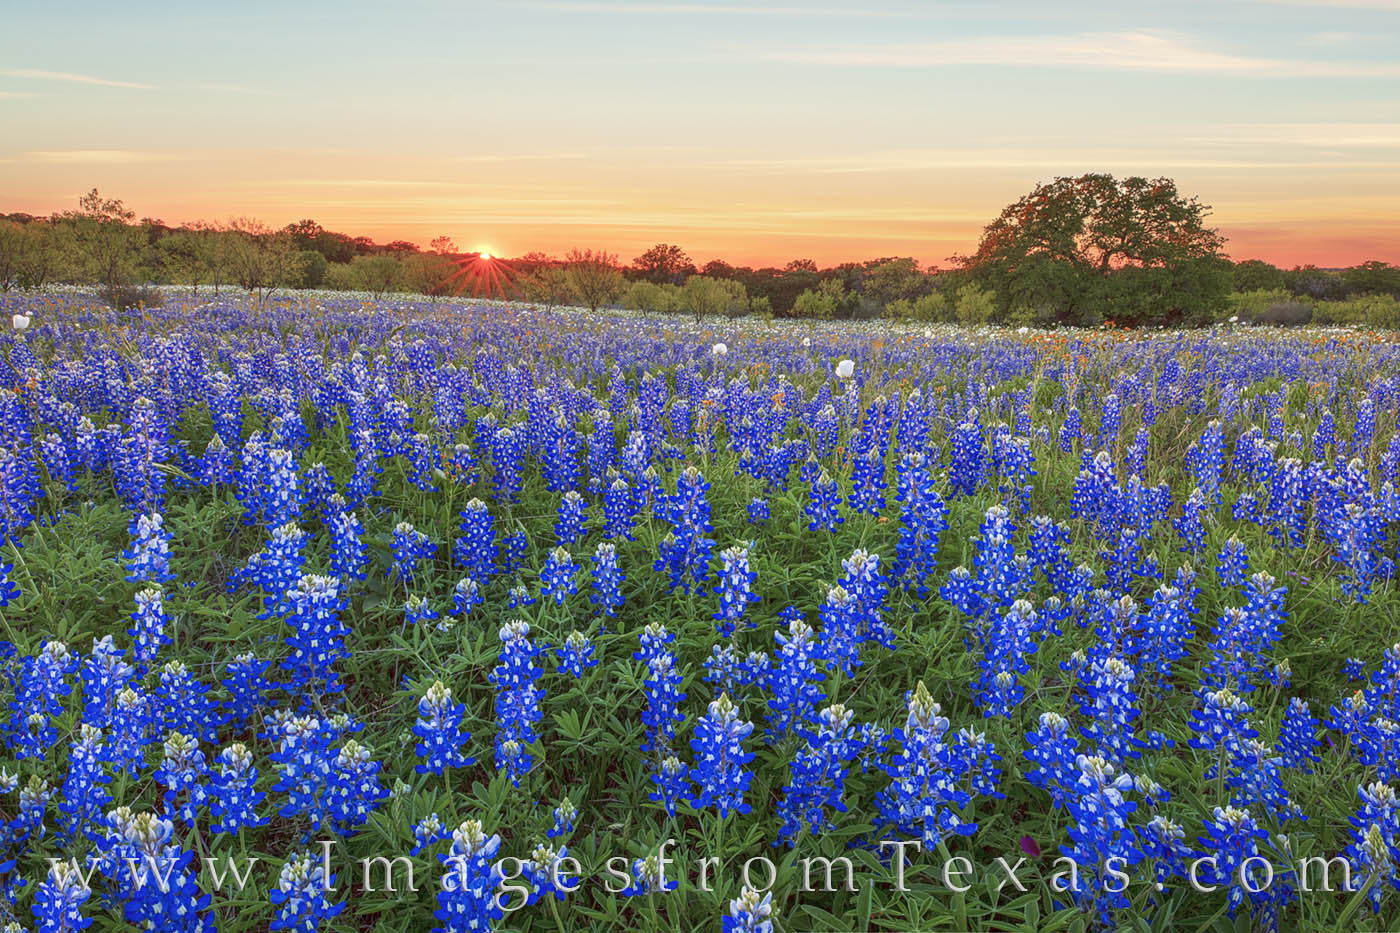 It is not often you can find solitude in today’s world. But on this evening surrounding by bluebonnets and the sounds of distant...